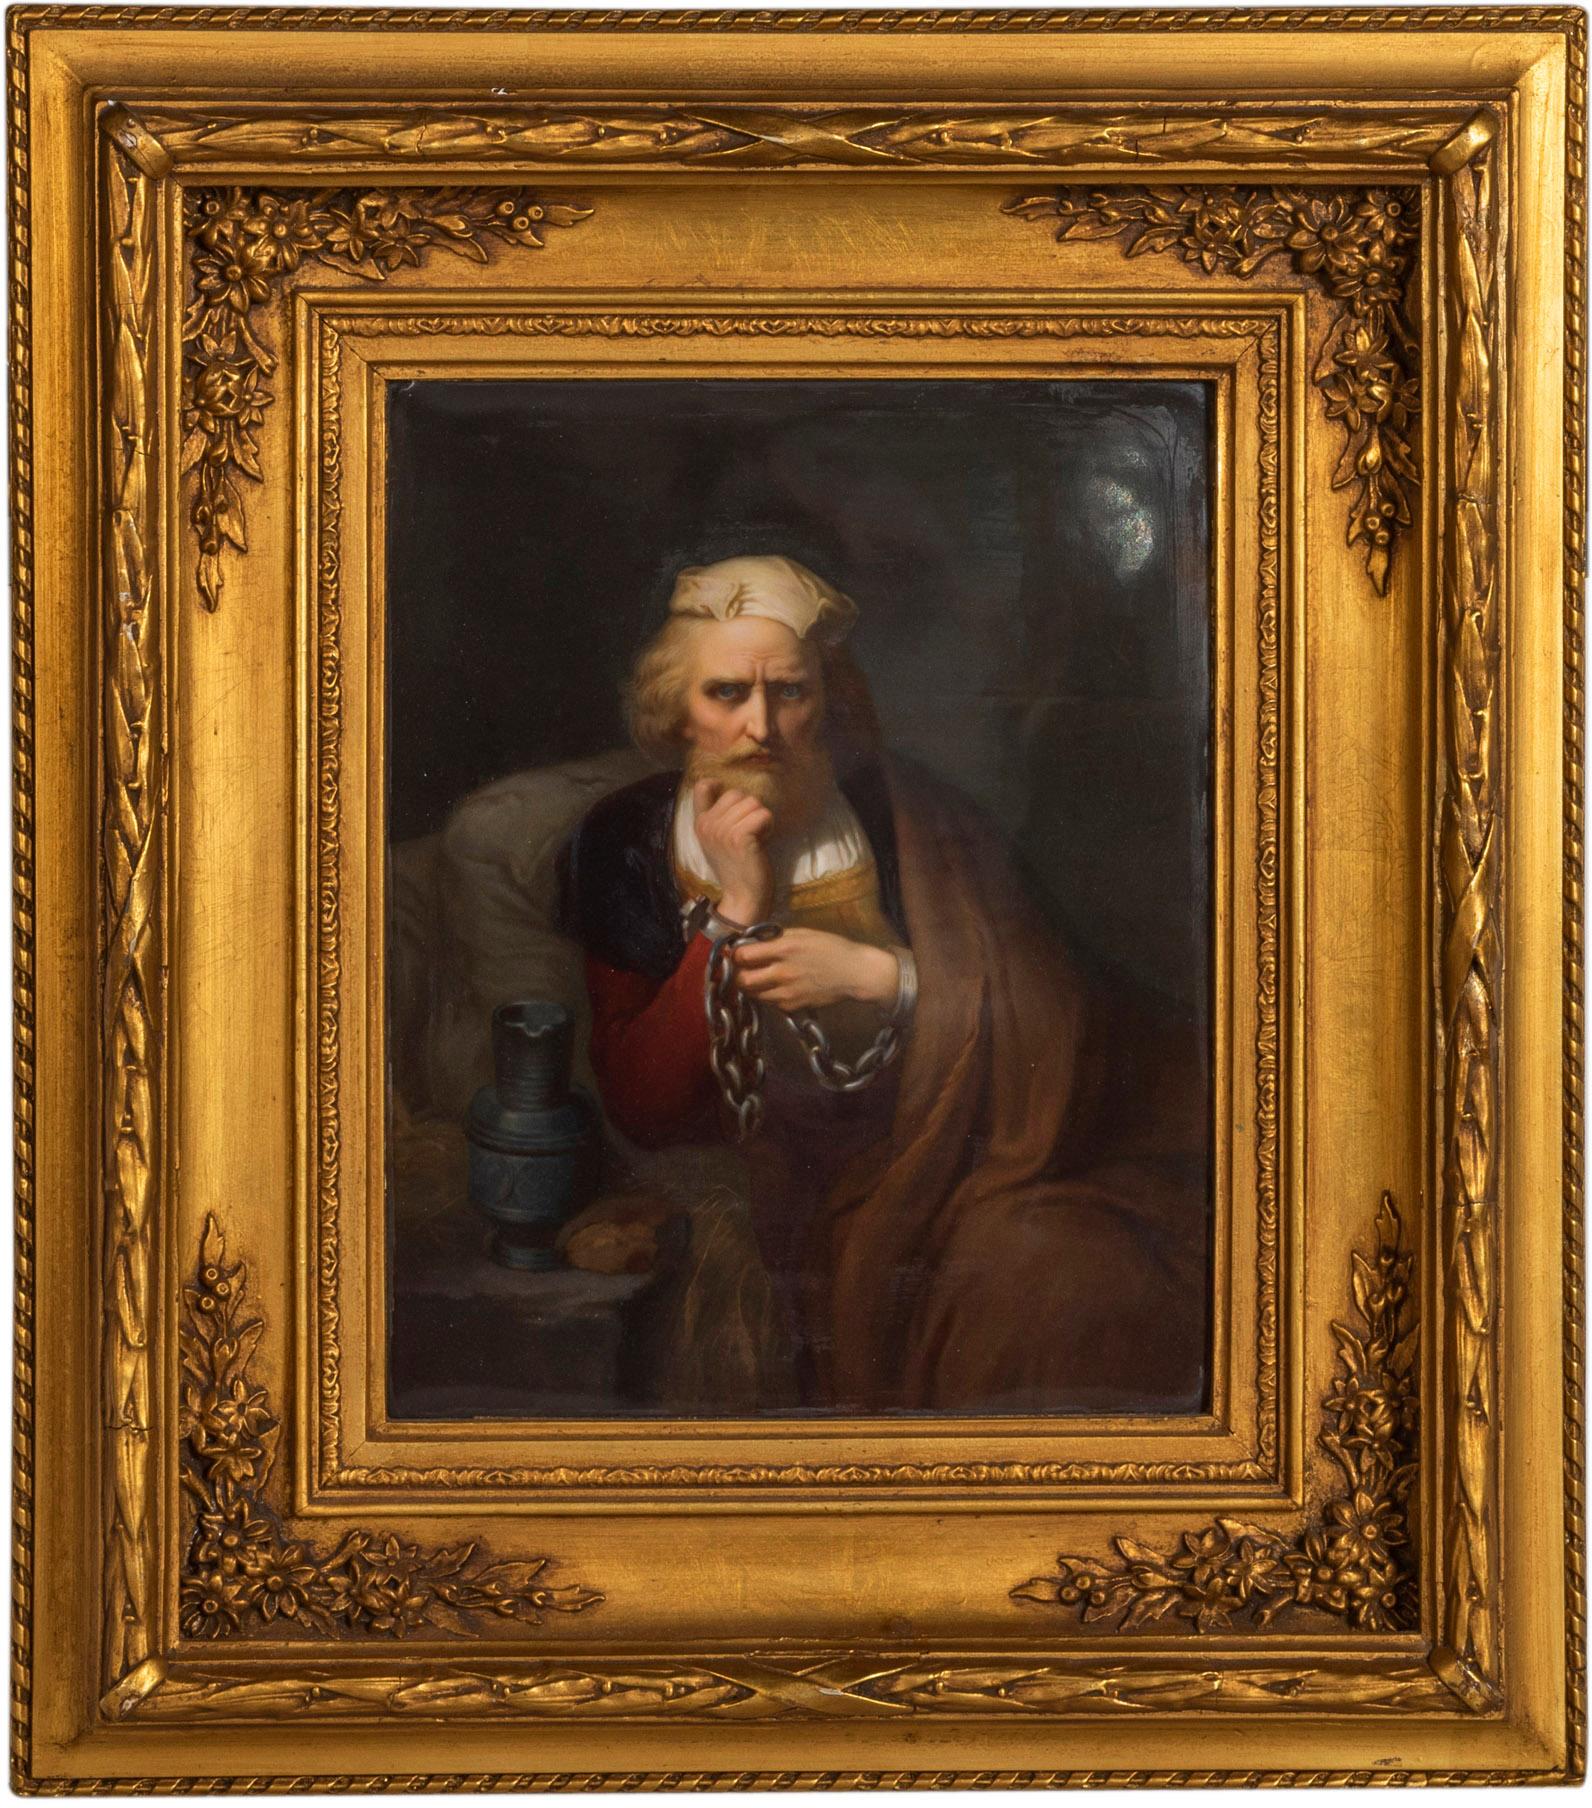 Berlin 'K.P.M.' Porcelain Plaque after Gustaaf Wappers In Good Condition For Sale In West Palm Beach, FL